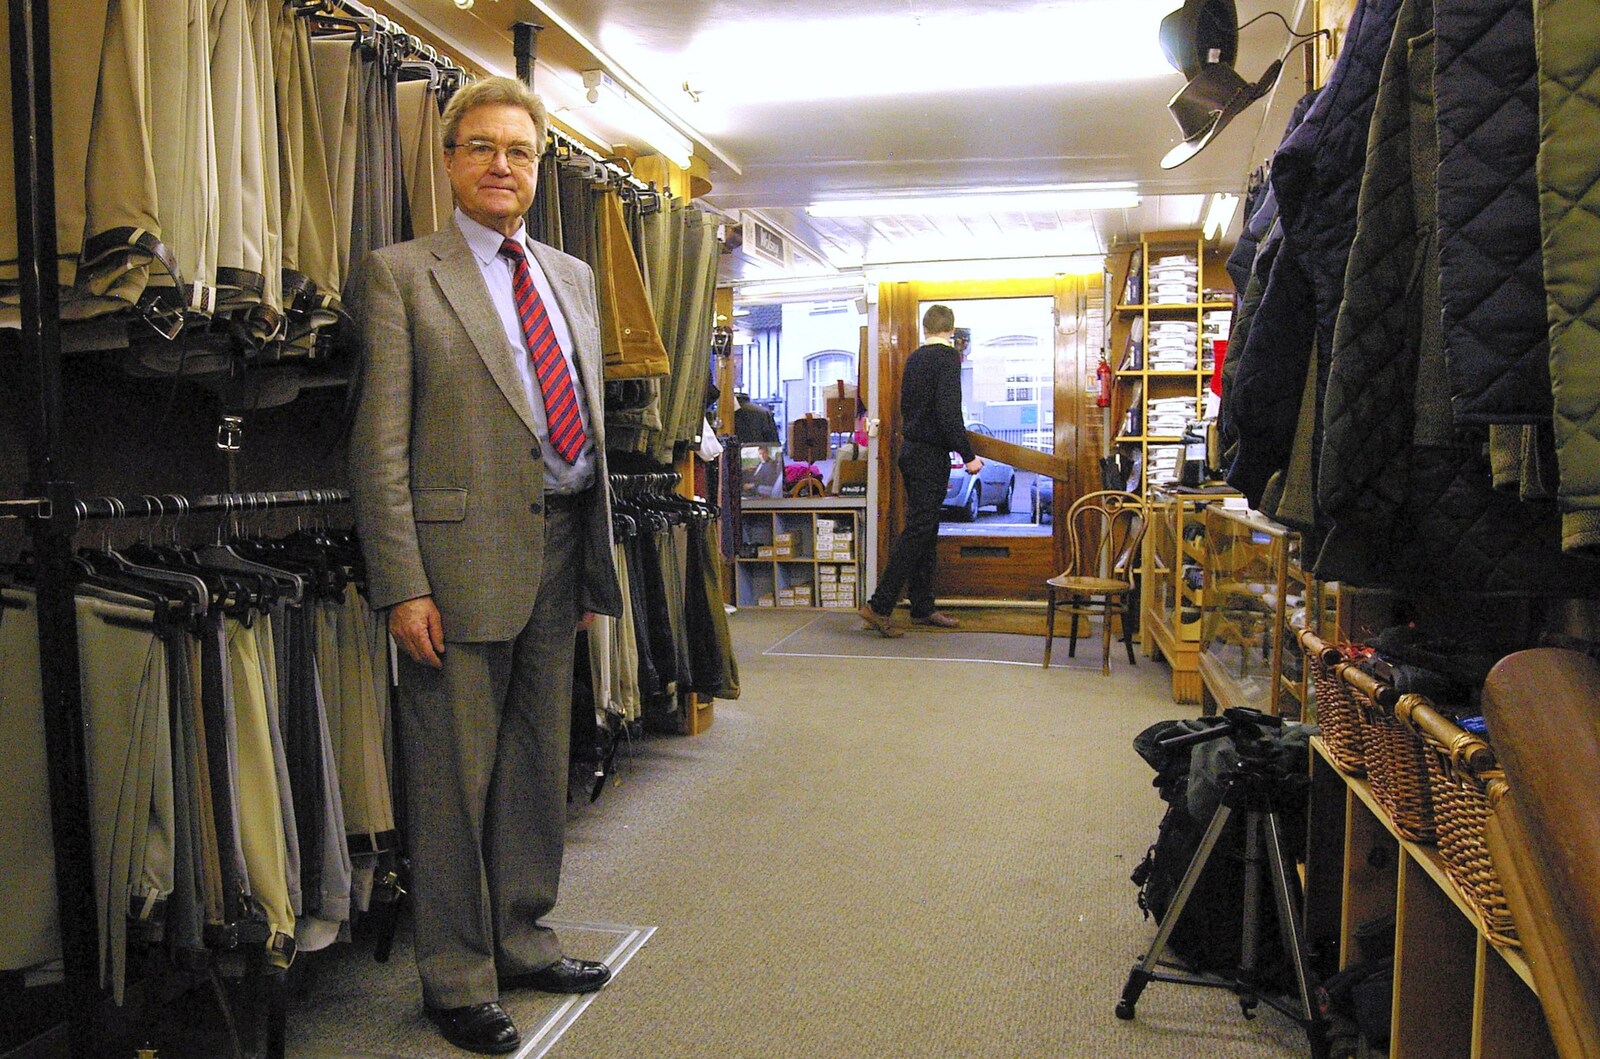 Peter stands by the trousers from A Portrait of Hopgoods: Gentlemen's Outfitters, Diss, Norfolk - 4th January 2006